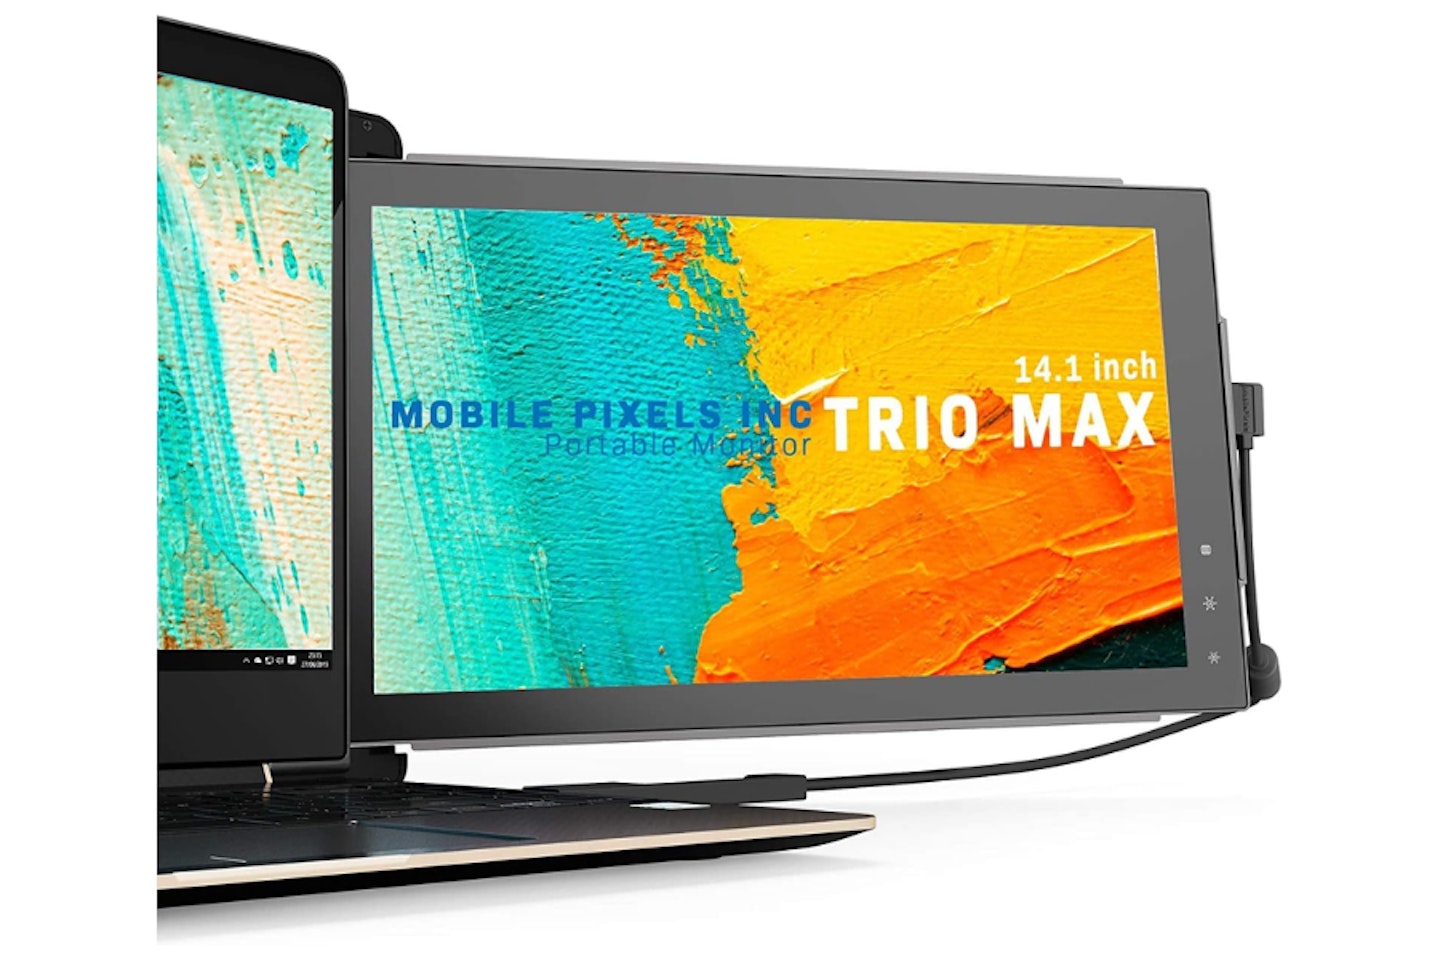 Trio Mobile Pixels Max Portable Monitor - one of the best portable monitors